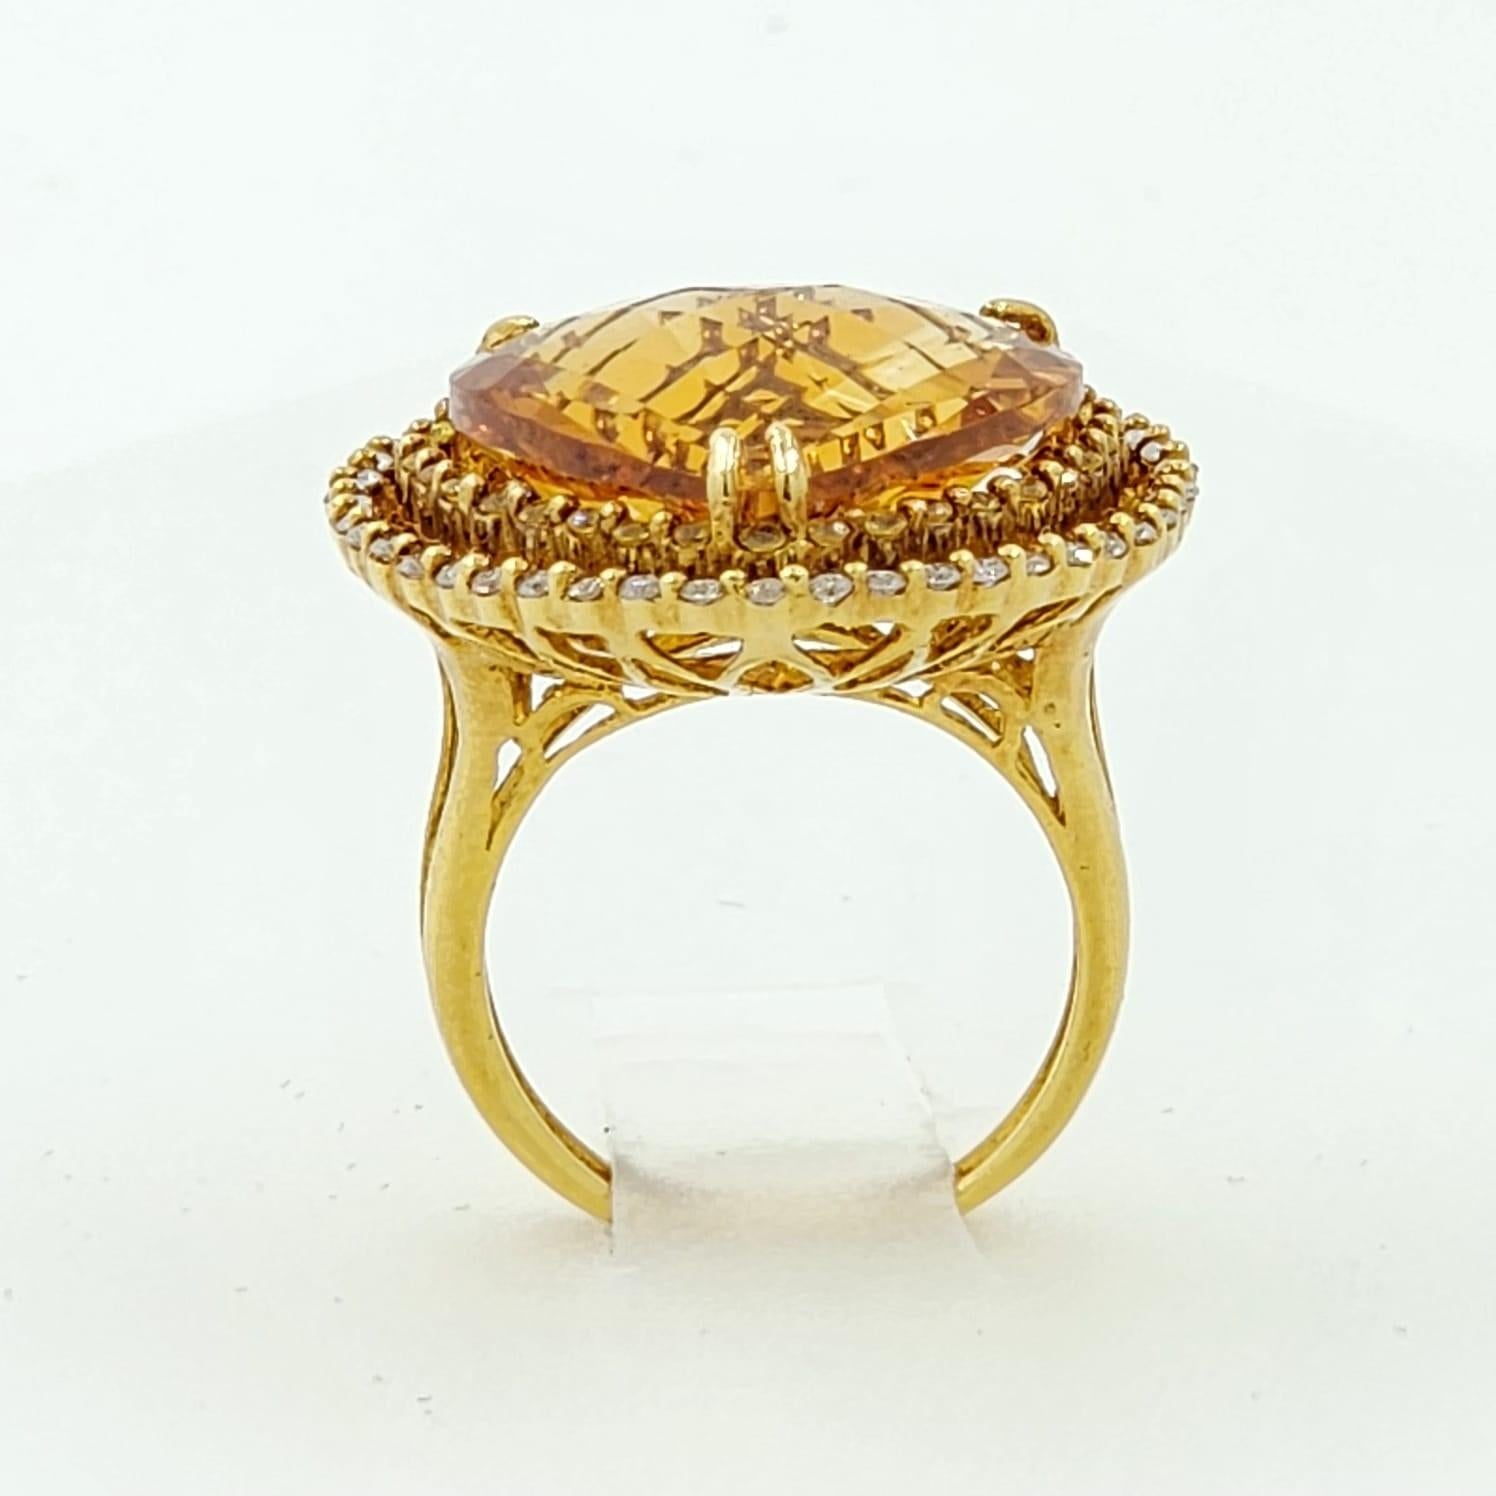 Contemporary 14.81 Carat Citrine Heart Cut Diamond Cocktail Ring in 18 Karat Yellow Gold For Sale